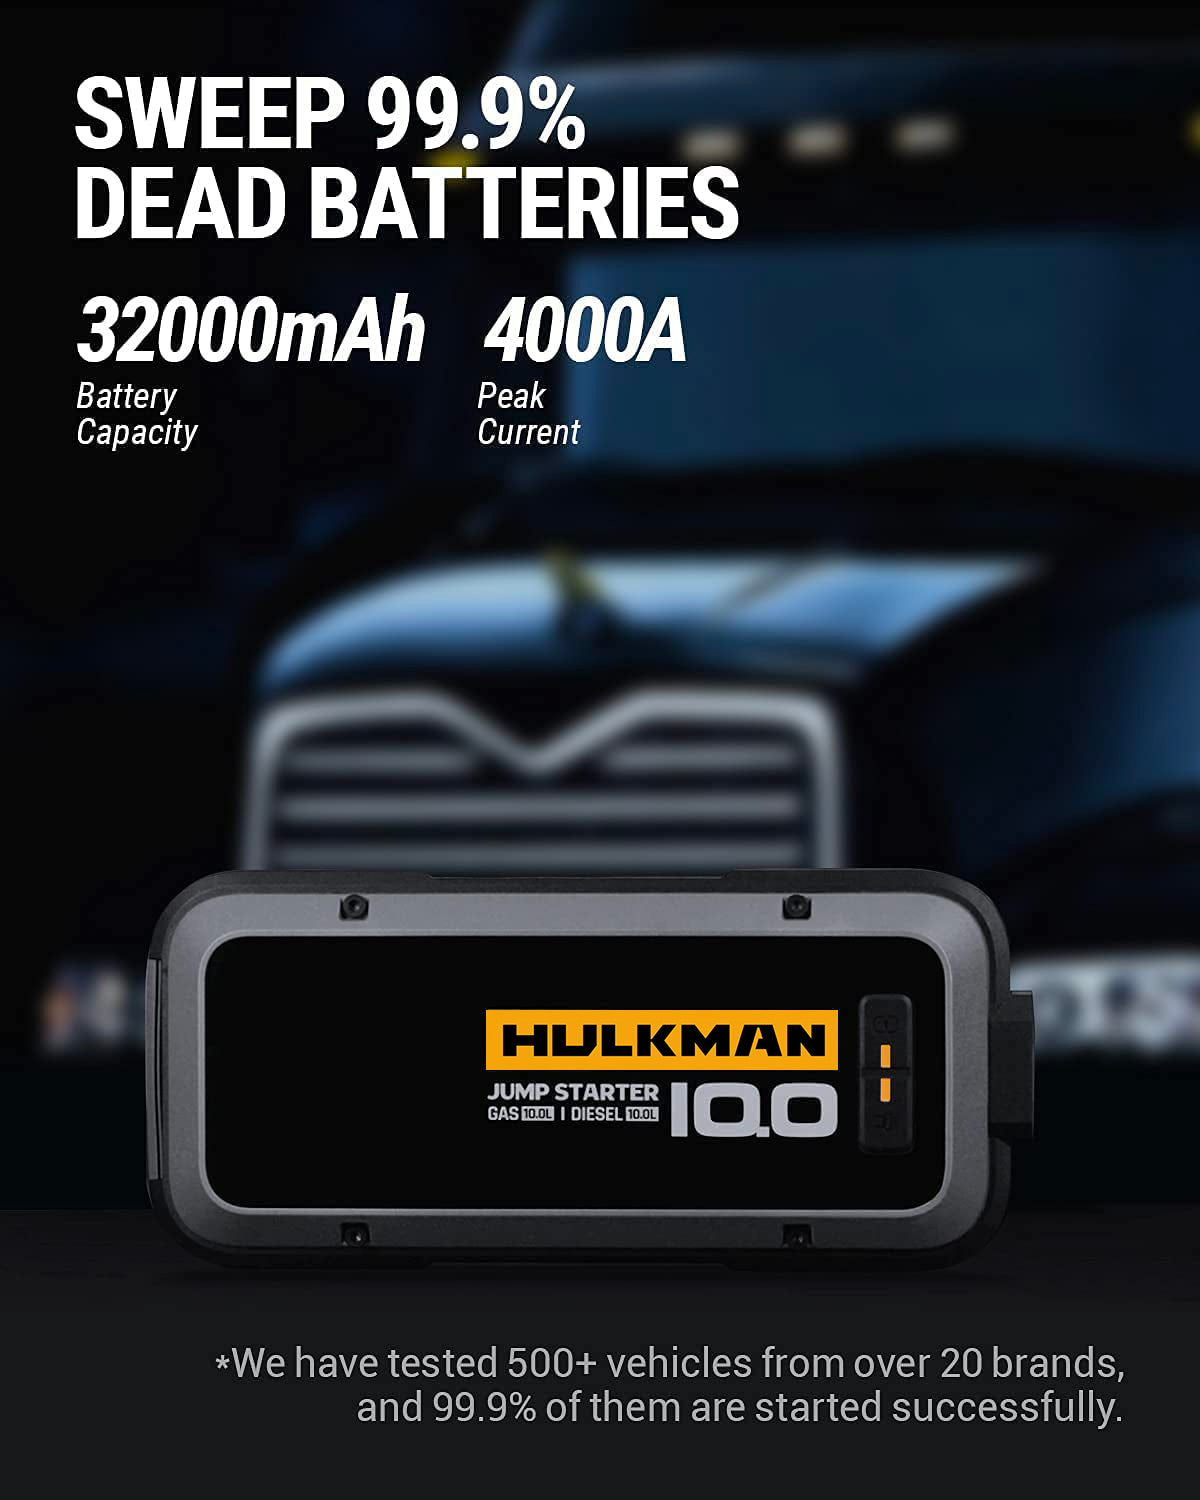 This Hulkman jump starter can really save the day - Boing Boing